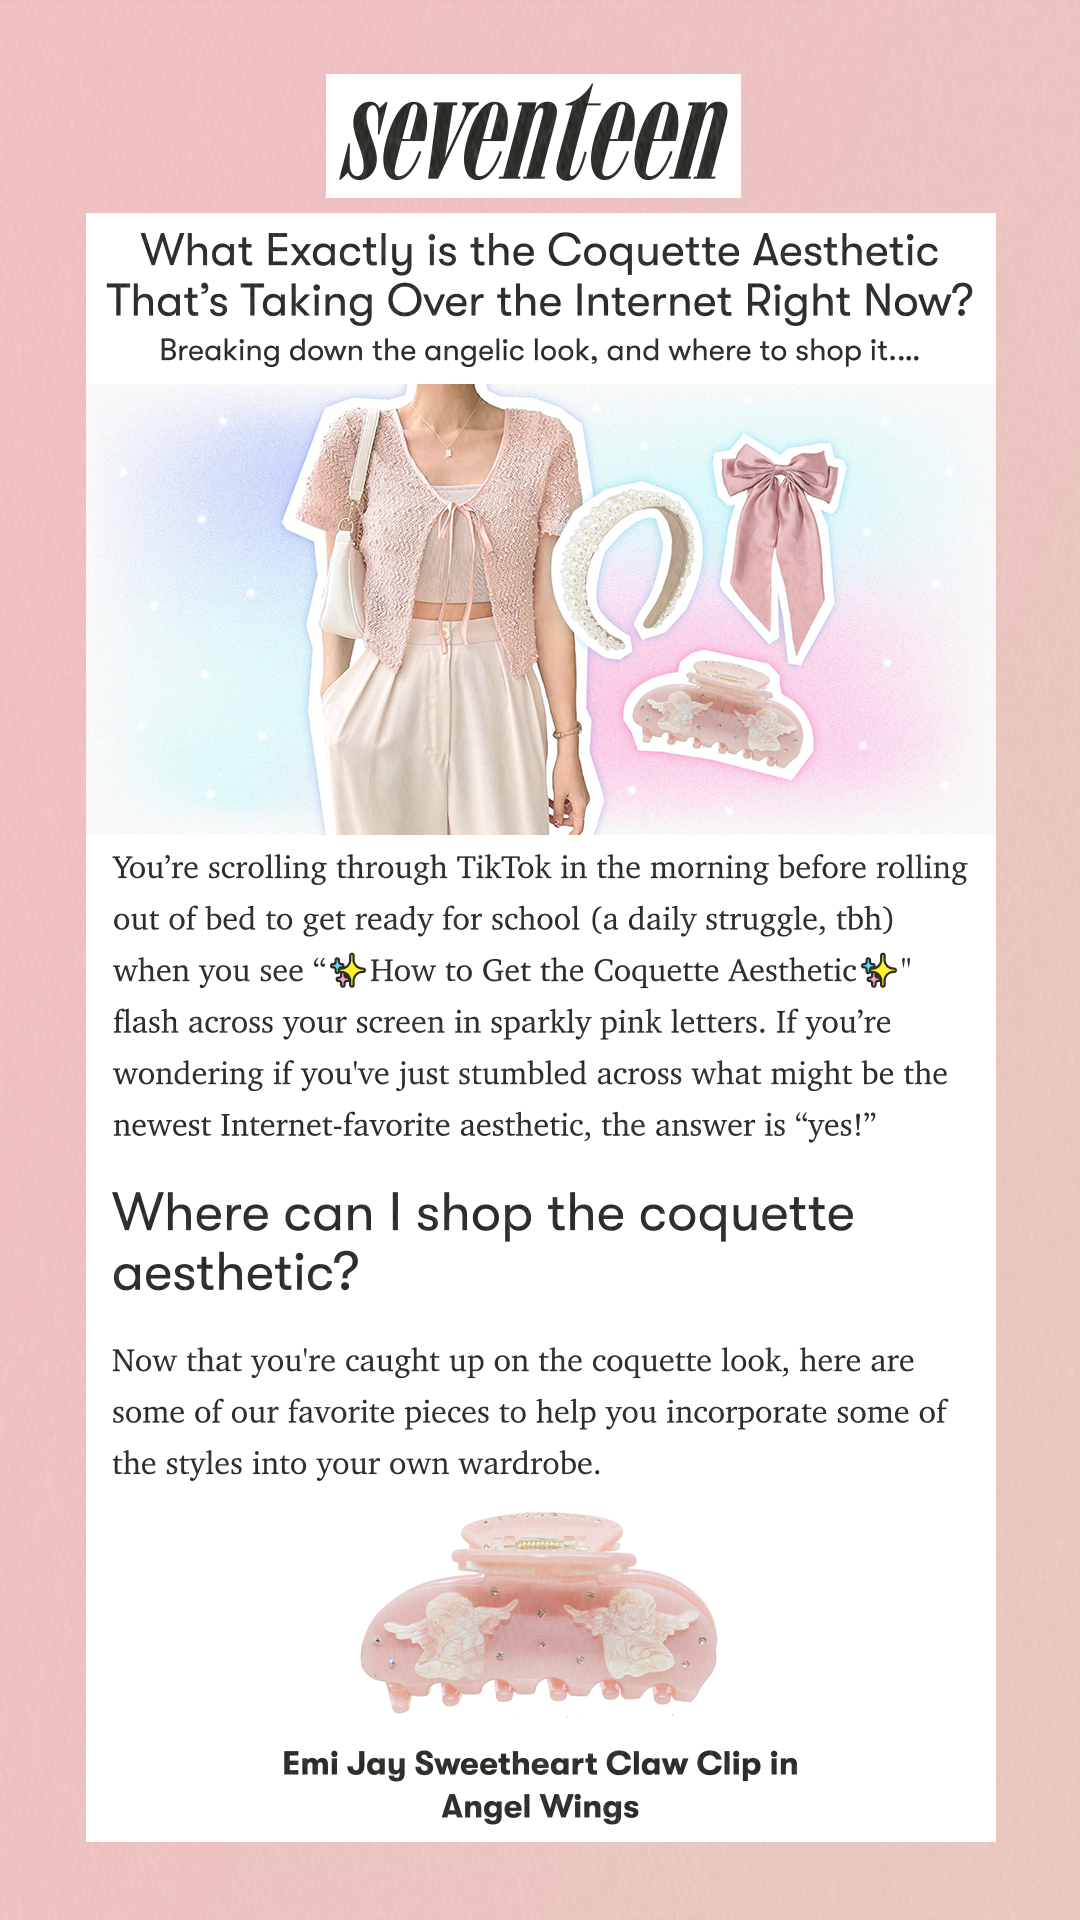 What Exactly is the Coquette Aesthetic That’s Taking Over the Internet Right Now? Breaking down the angelic look, and where to shop it. You’re scrolling through TikTok in the morning before rolling out of bed to get ready for school (a daily struggle, tbh) when you see ✨How to Get the Coquette Aesthetic✨ flash across your screen in sparkly pink letters. If you’re wondering if you've just stumbled across what might be the newest Internet-favorite aesthetic, the answer is “yes!”  Where can I shop the coquette aesthetic? Now that you're caught up on the coquette look, here are some of our favorite pieces to help you incorporate some of the styles into your own wardrobe. Emi Jay Sweetheart Claw Clip in Angel Wings